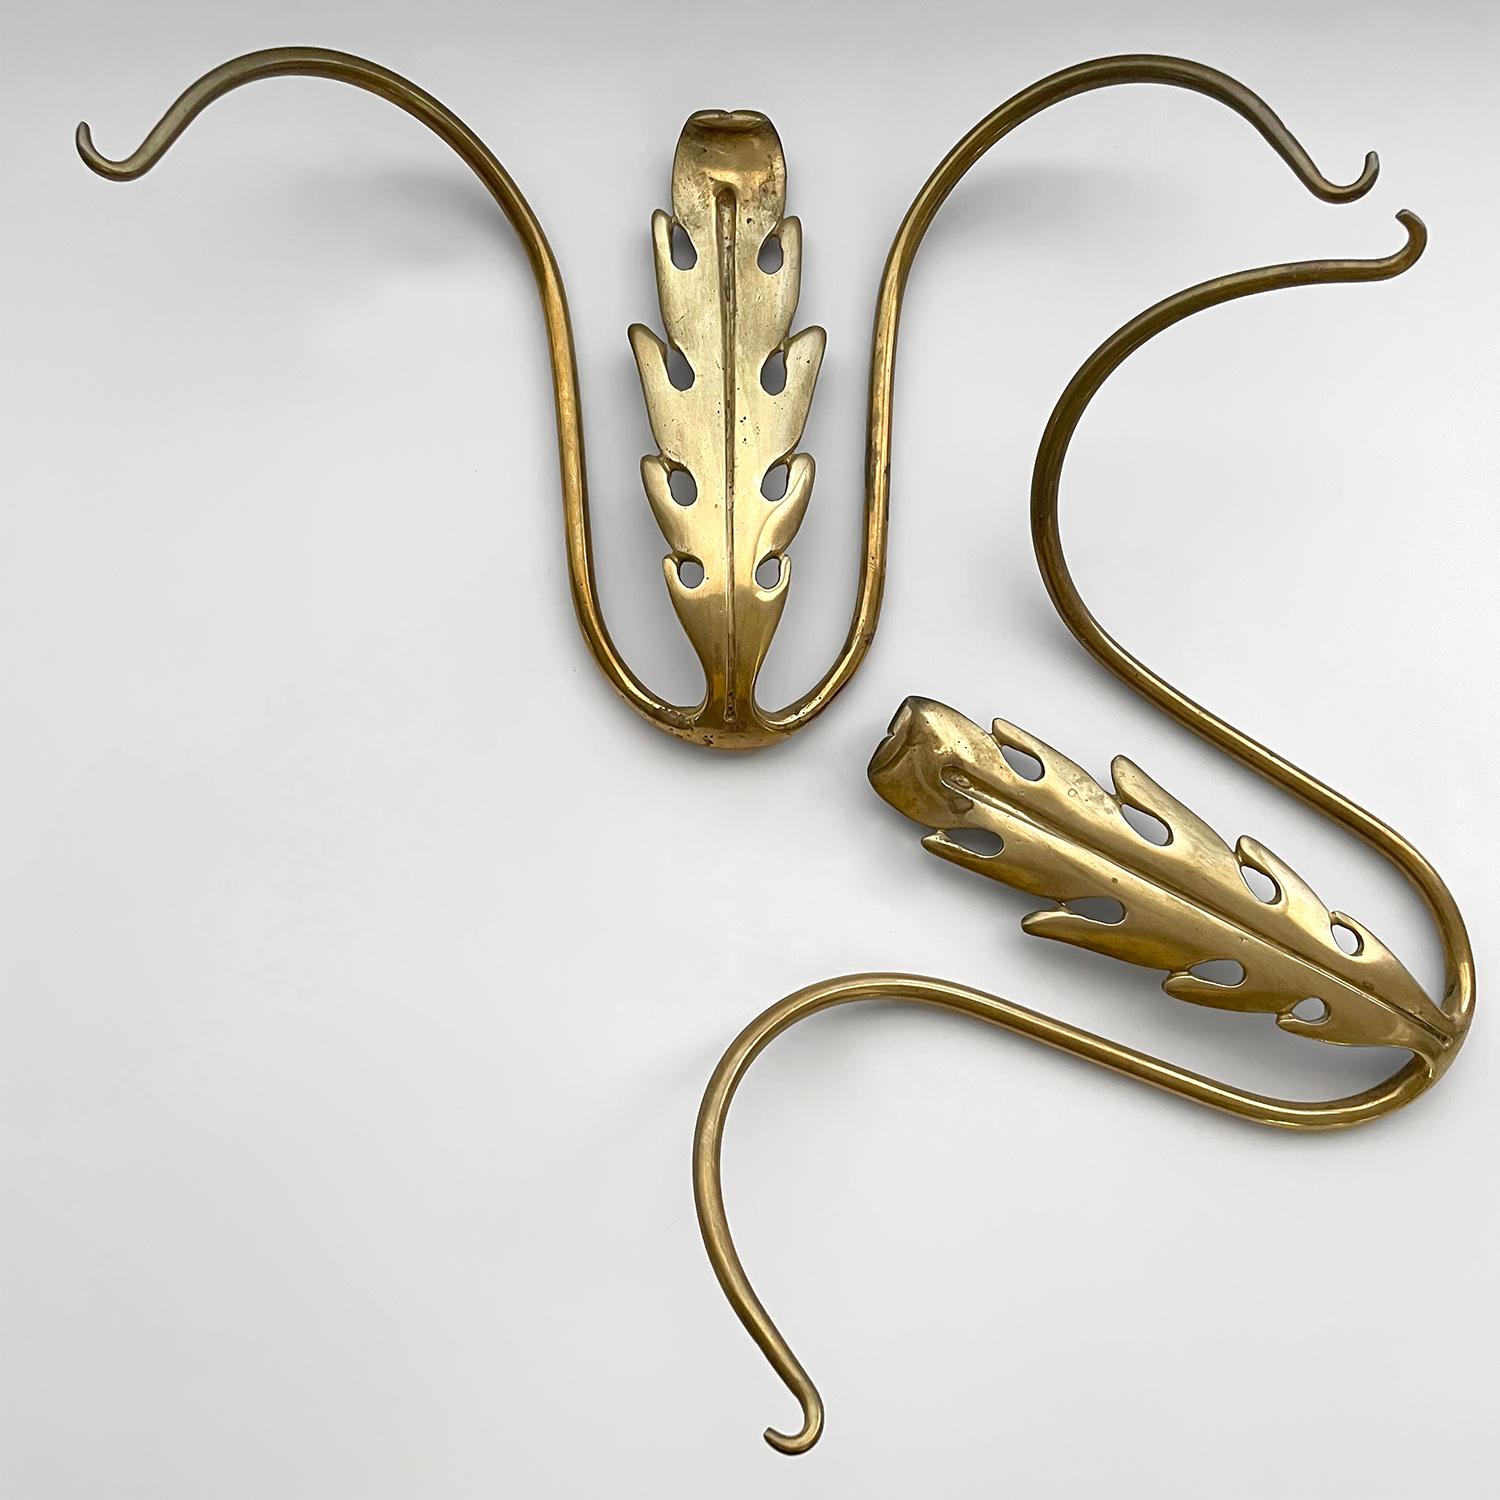 Stunning pair of Italian sculpted brass double wall hooks
Italy, 1950’s 
Timeless classic  that will brighten any wall space
Beautifully sculpted brass
Floral motif centerpiece with delicately curved arms
Each hook has a single wall mount
Patina